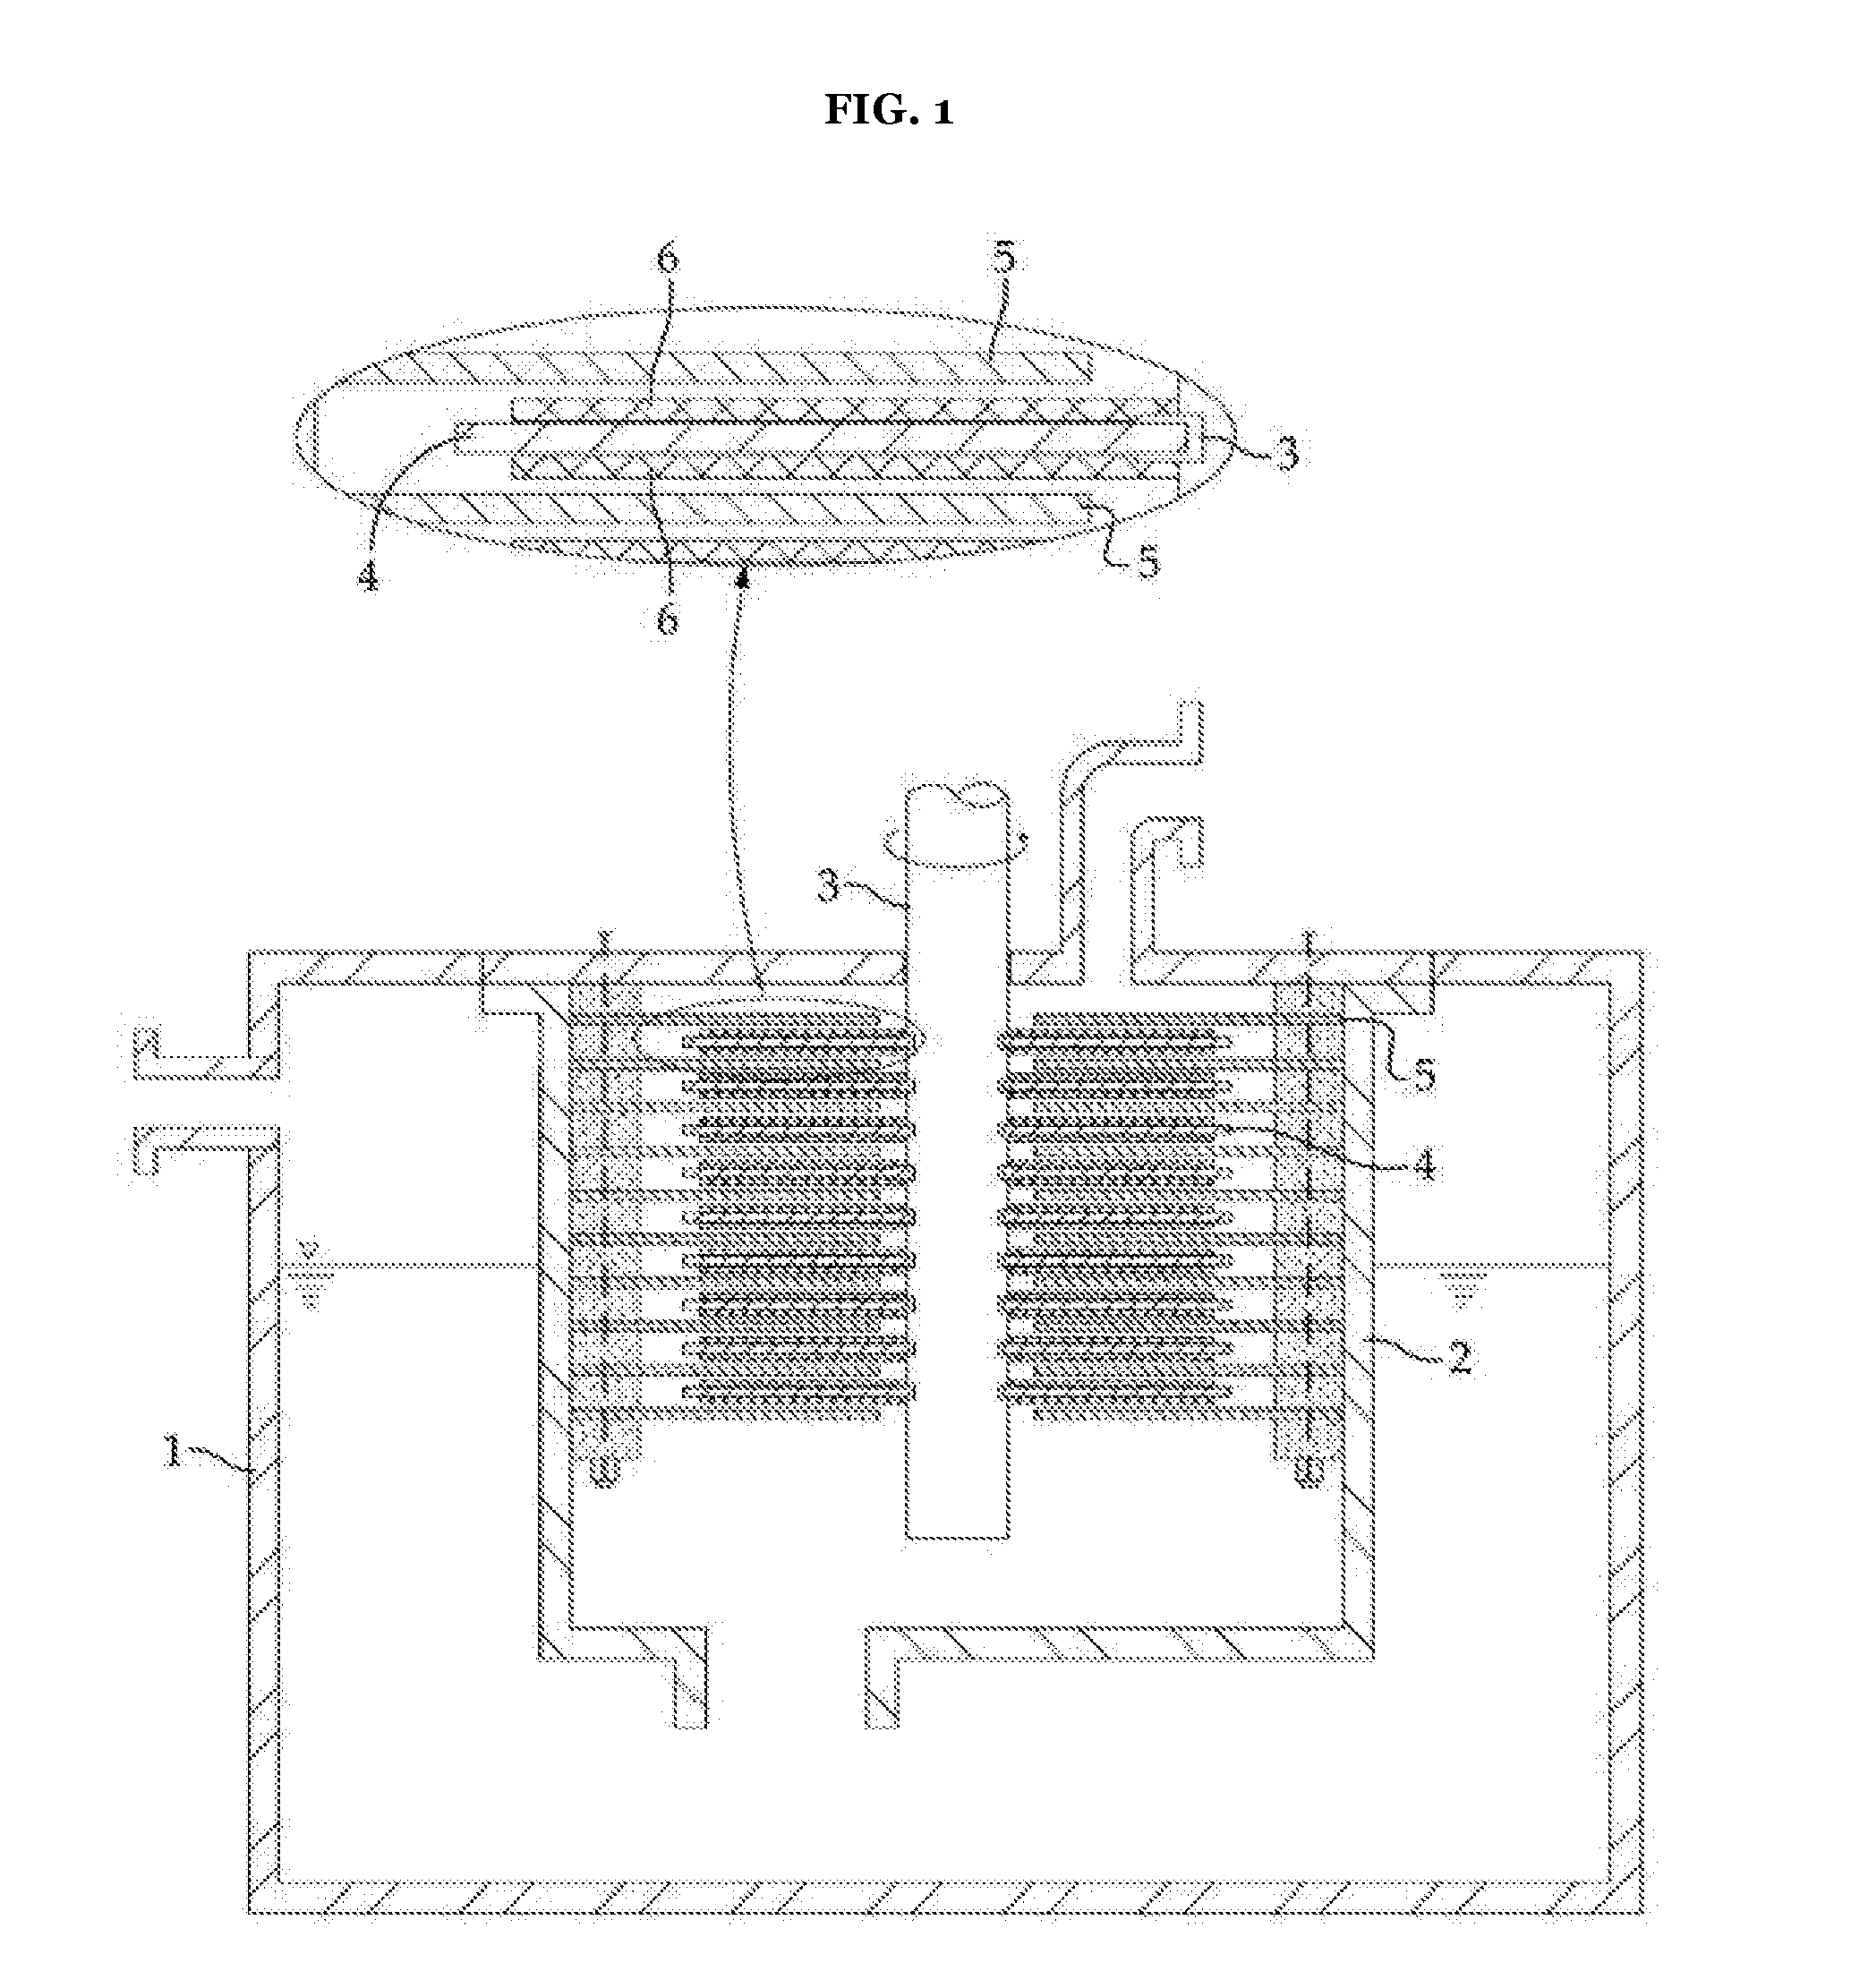 Apparatus and system for treating acid mine drainage using electrochemical reaction